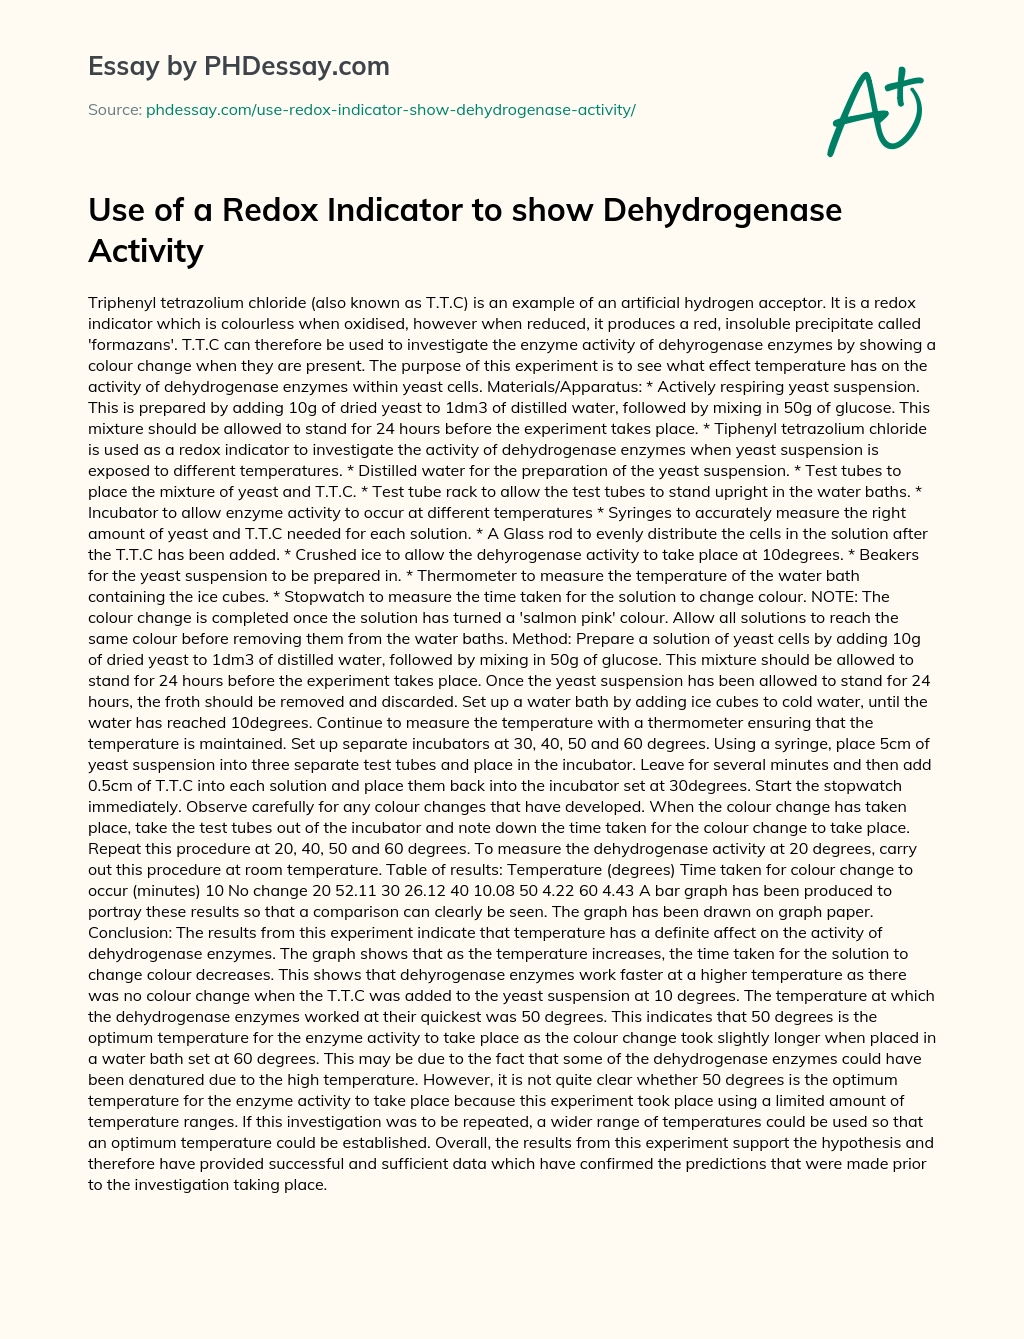 Use of a Redox Indicator to show Dehydrogenase Activity essay